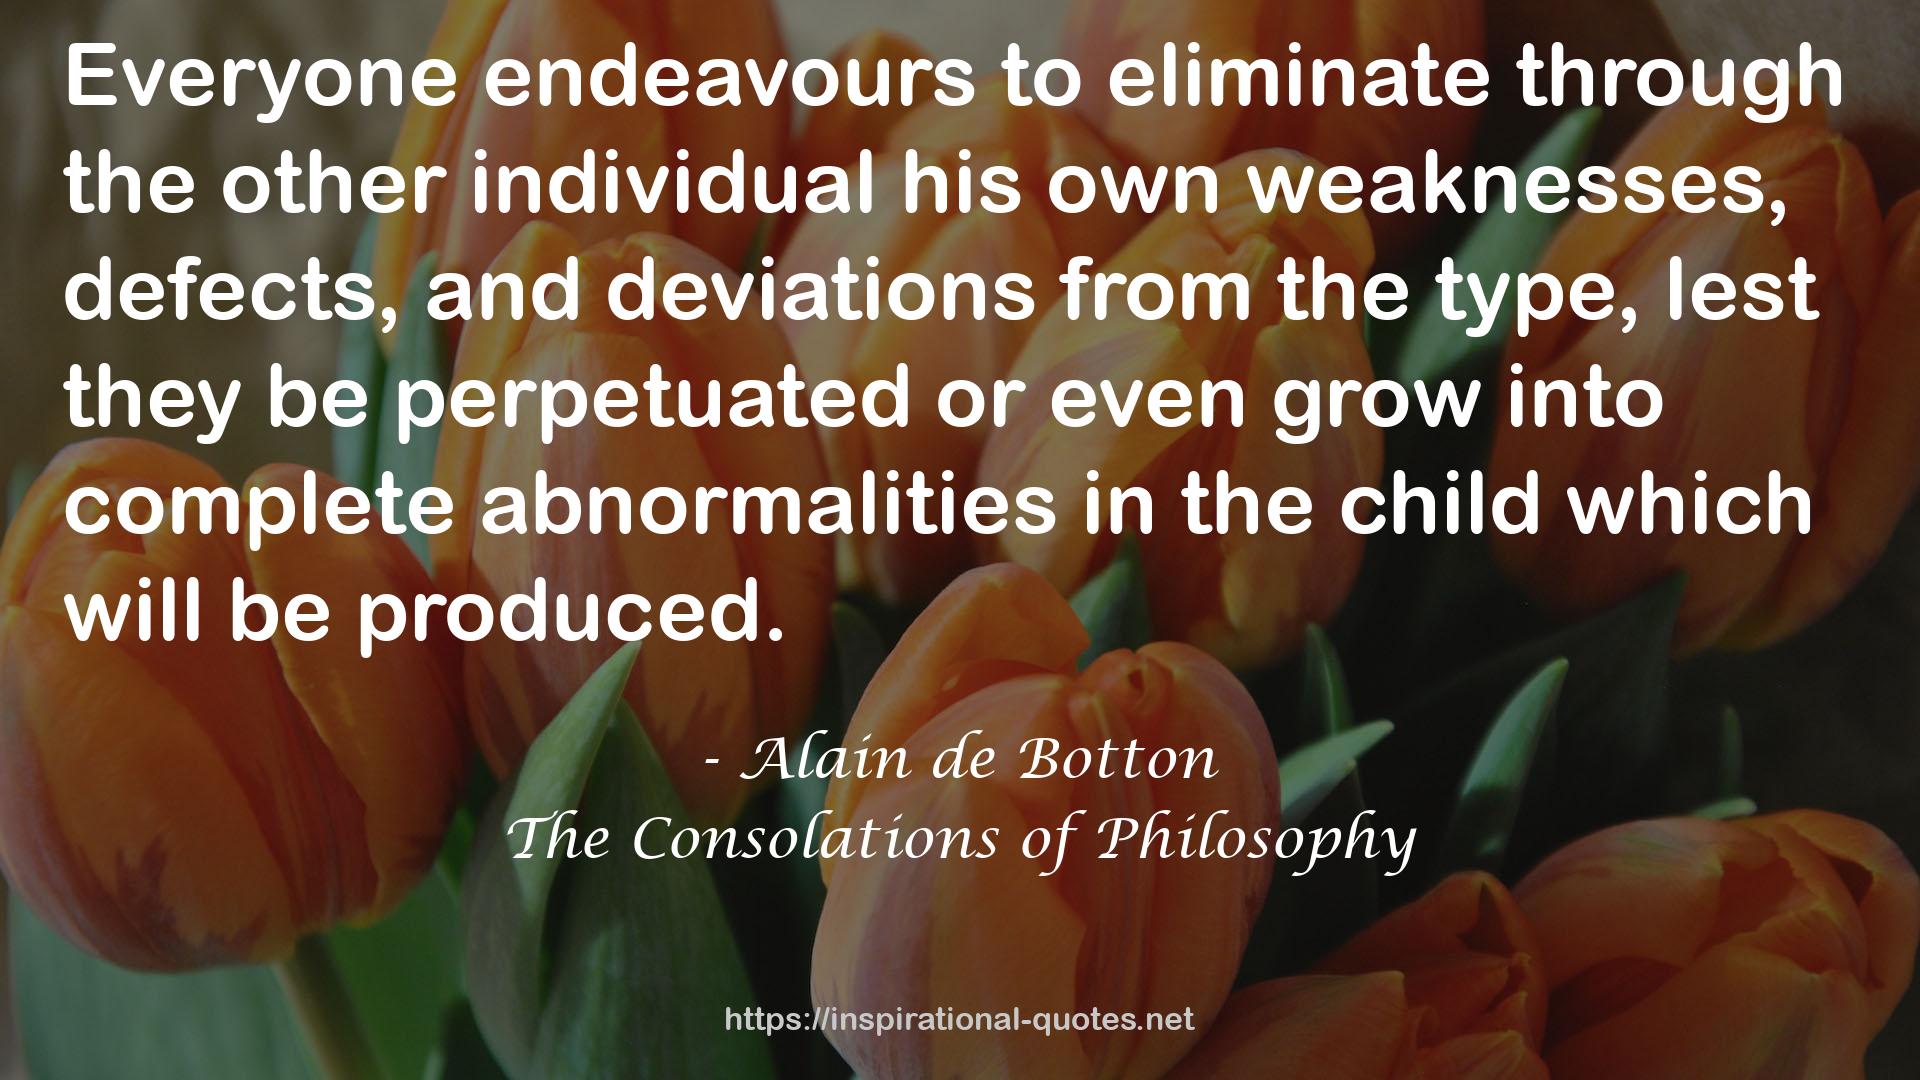 The Consolations of Philosophy QUOTES